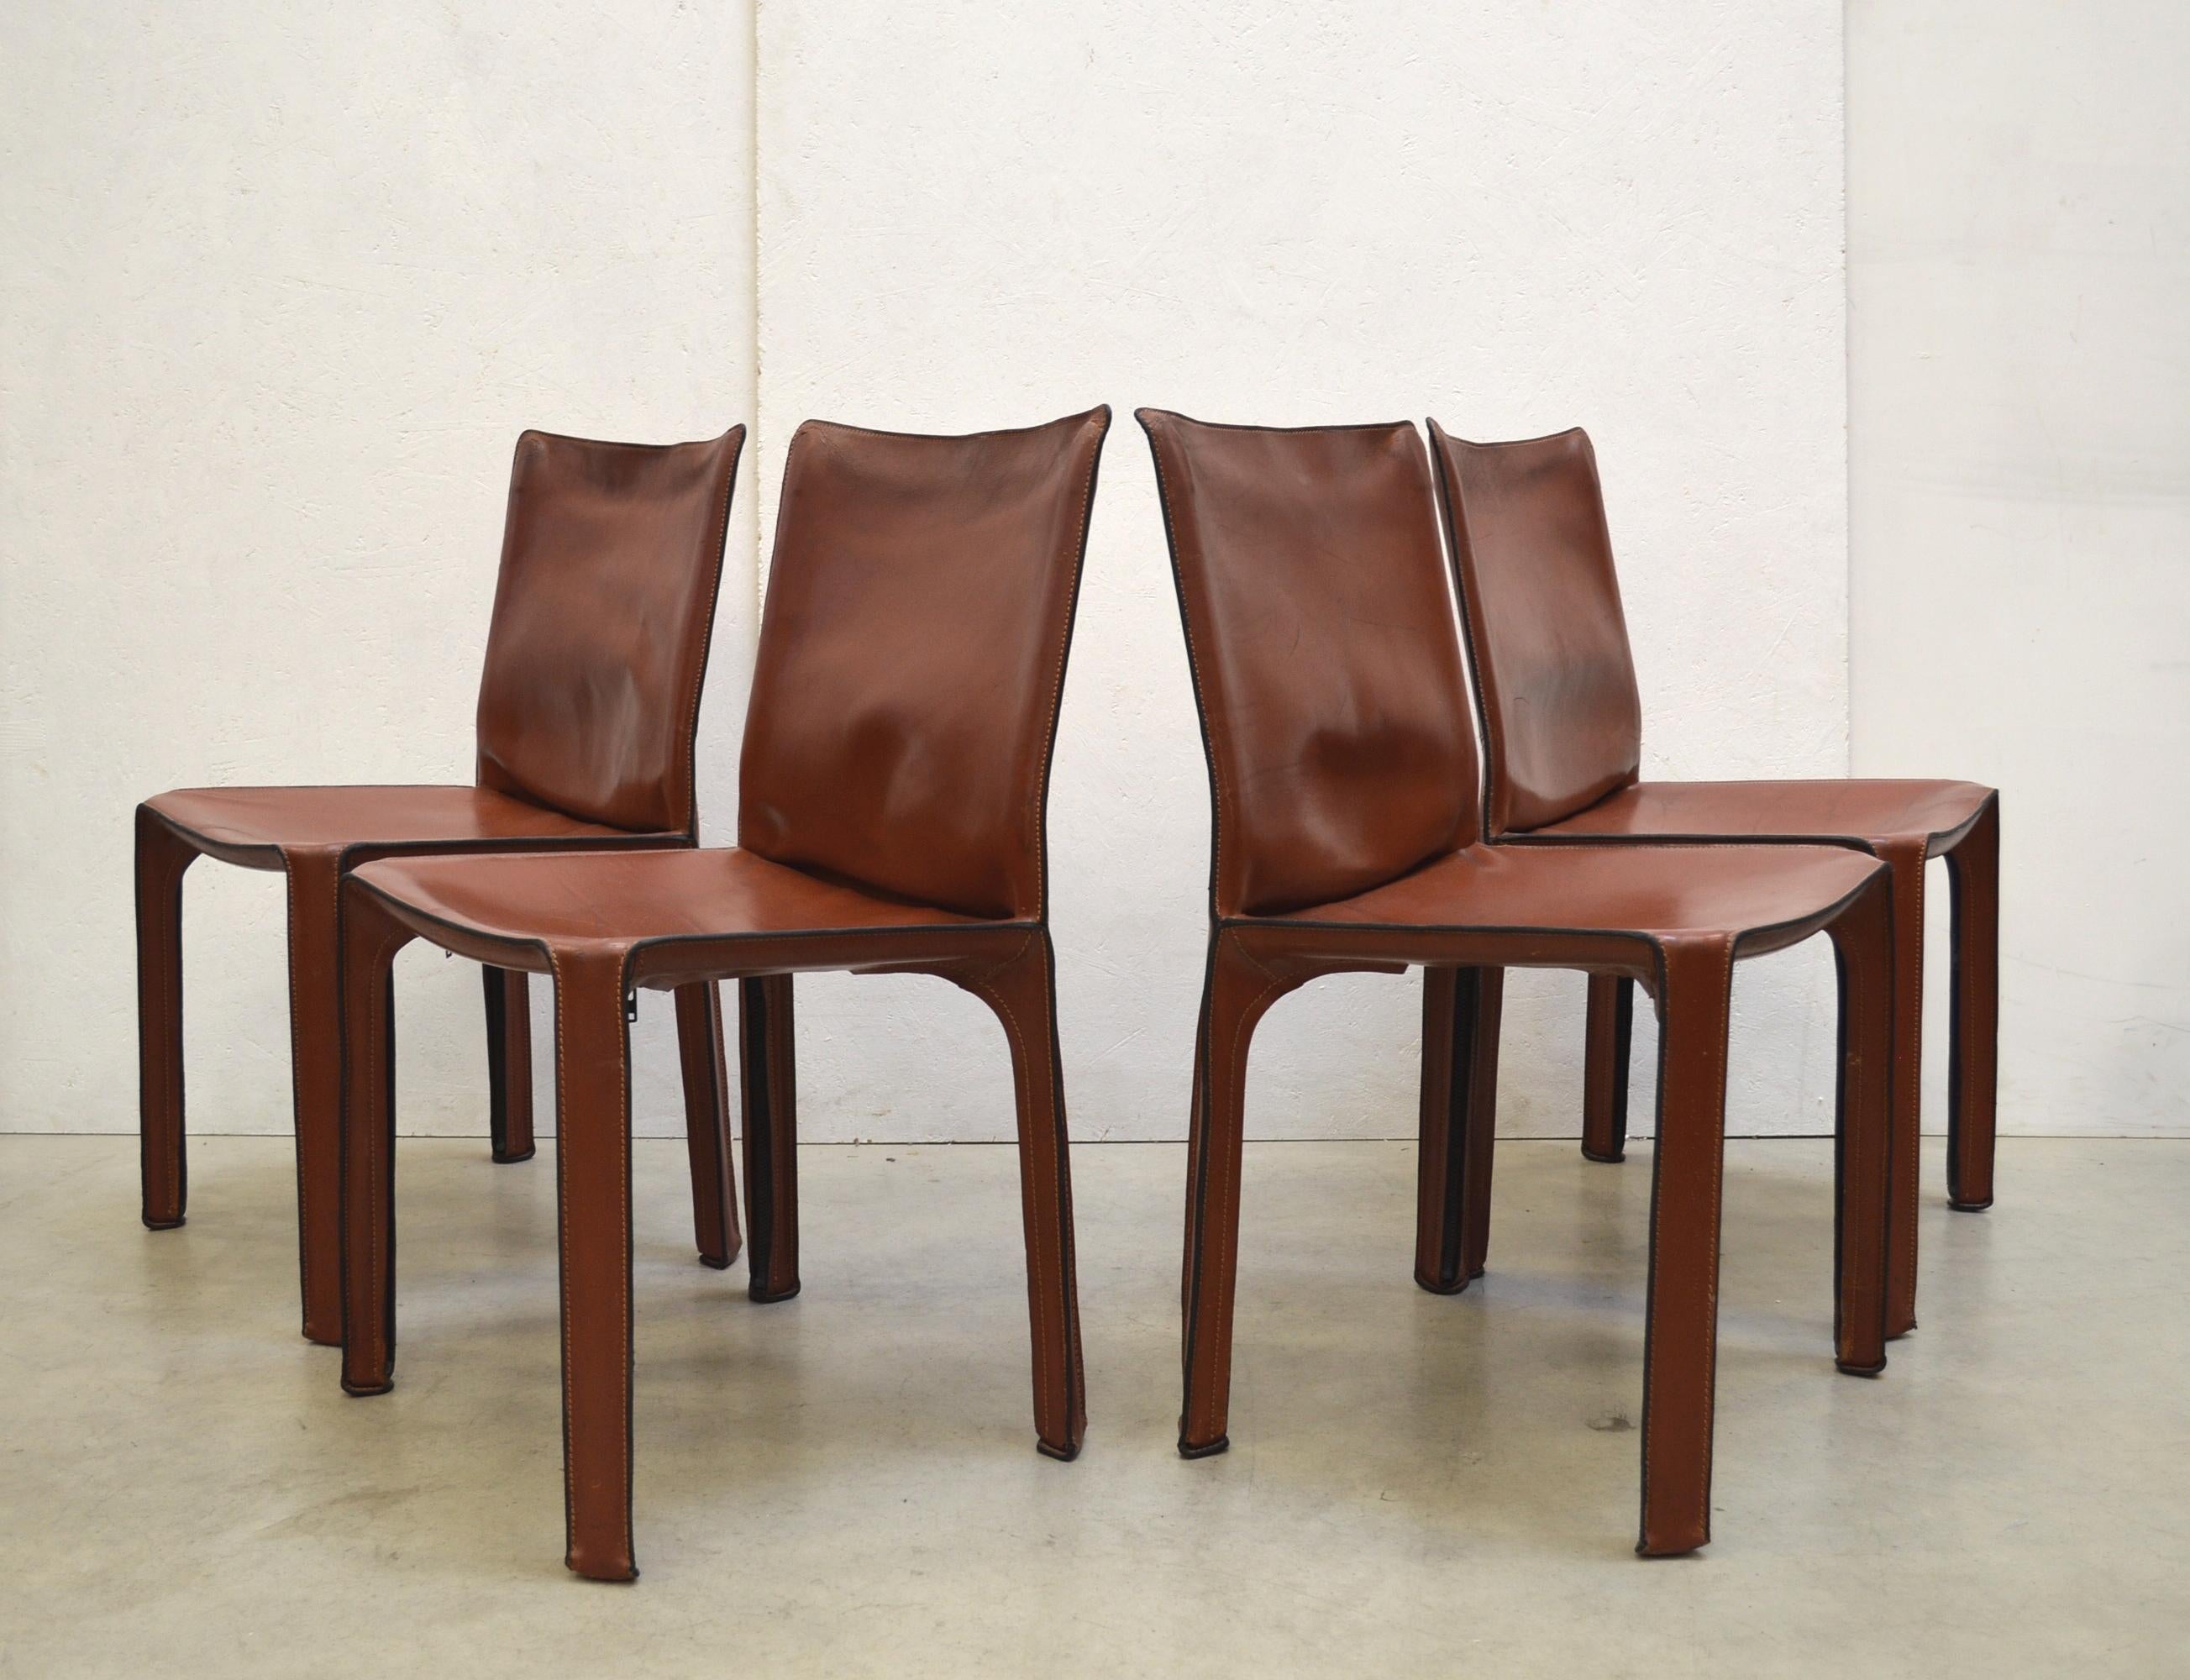 Set of 4 iconic cab chair model 412 by Mario Bellini for Cassina.
These cab chairs coming from the 1st series production.
Original made in Italy.

Full patinated Cognac saddle leather which comes in nice condition with some patina.

Timeless